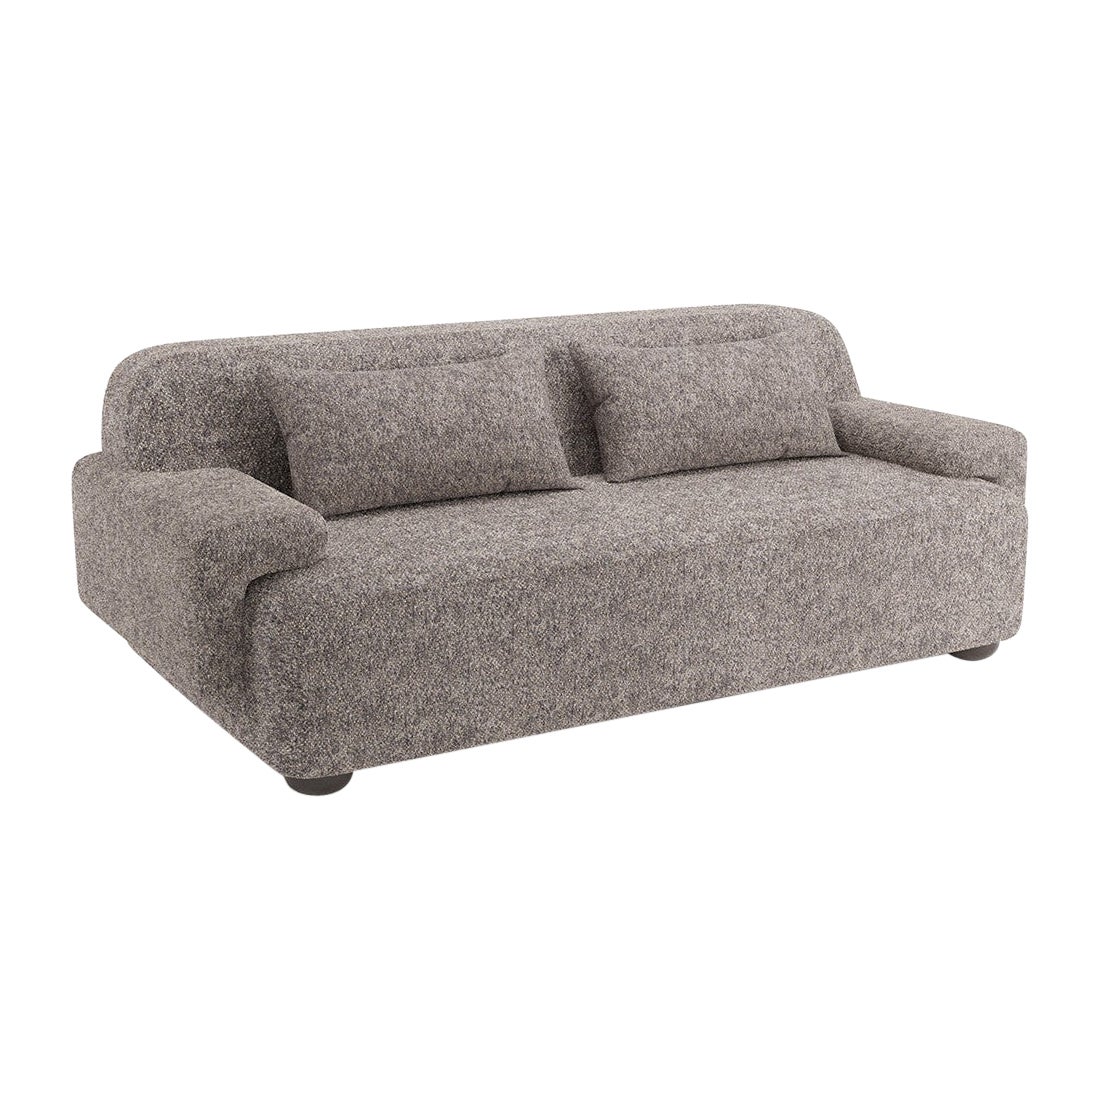 Popus Editions Lena 2.5 Seater Sofa in Anthracite Antwerp Linen Upholstery For Sale